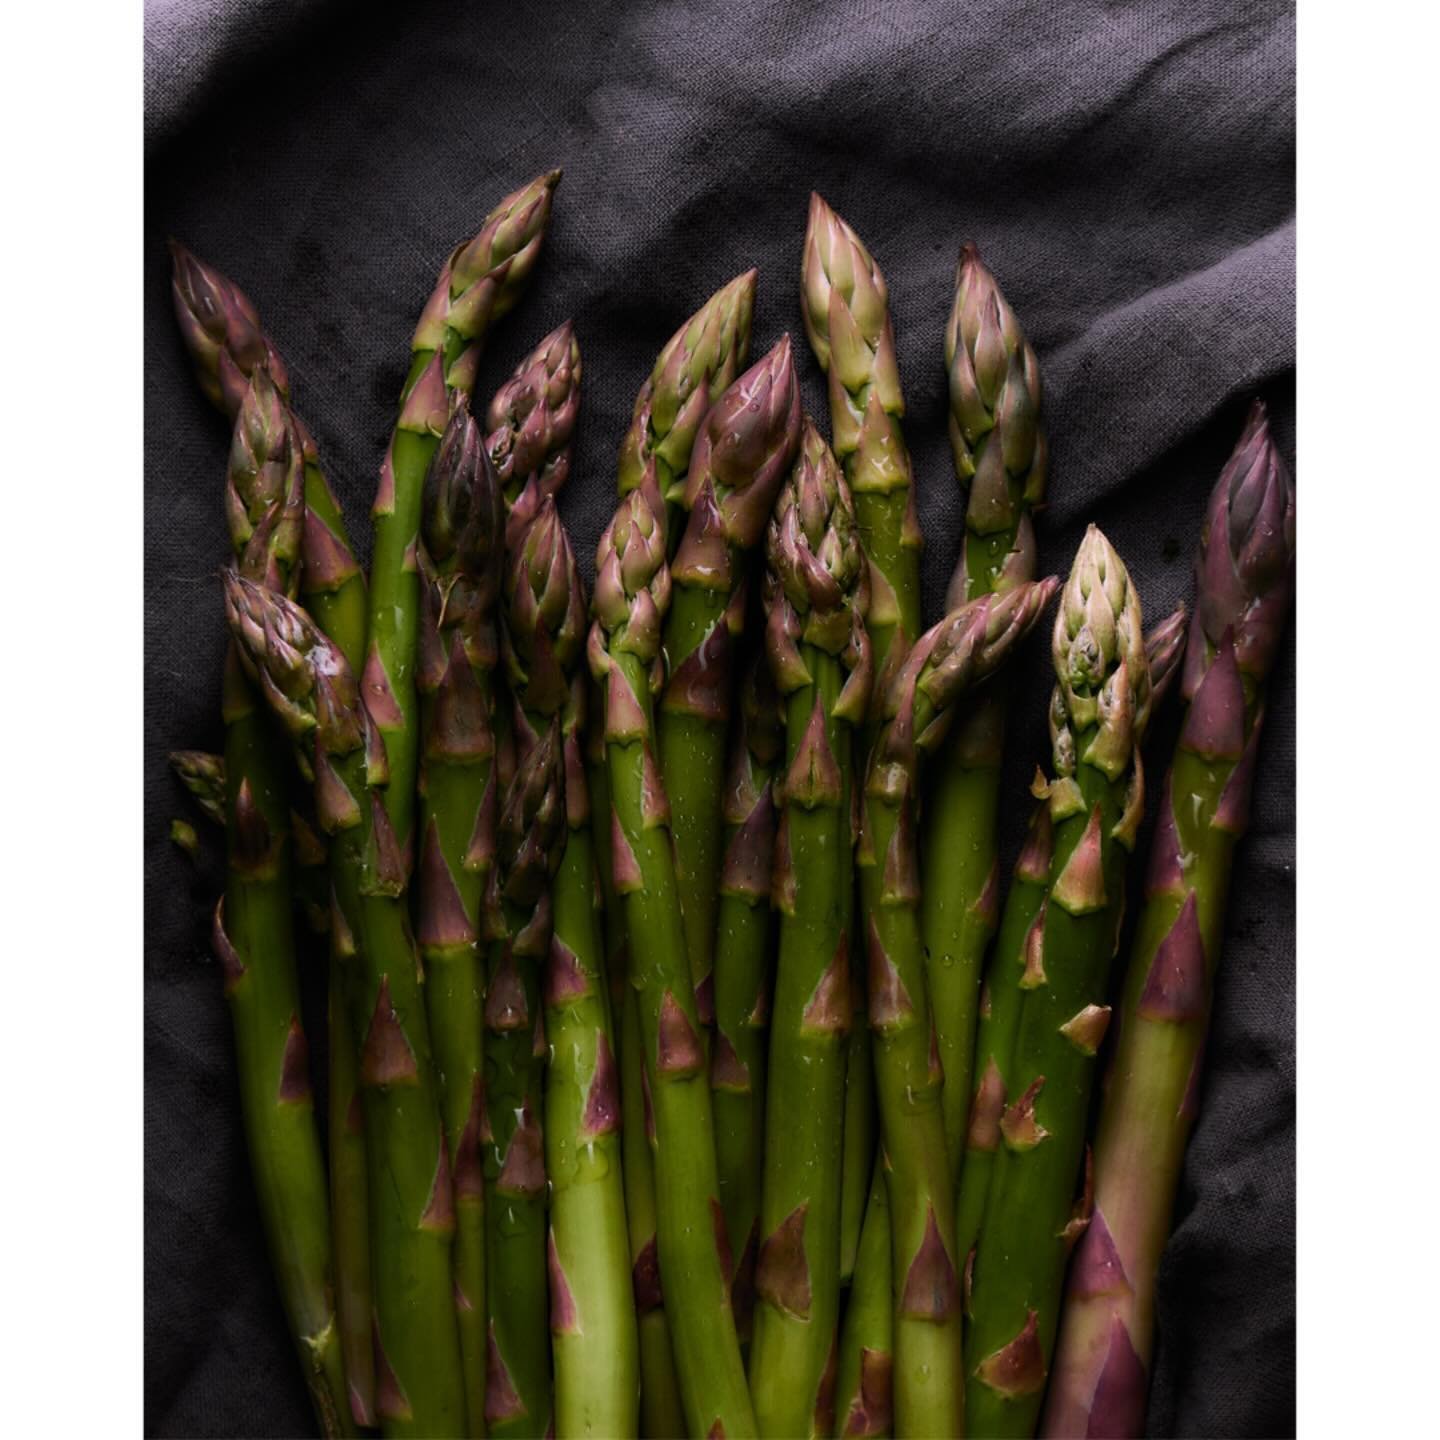 Back on my obsessively photographing farmers&rsquo; market produce game and couldn&rsquo;t be happier. #pageandplate #stilllife #chicagofoodphotographer #foodphotography #foodphotographyandstyling #cookbookphotography #asparagus